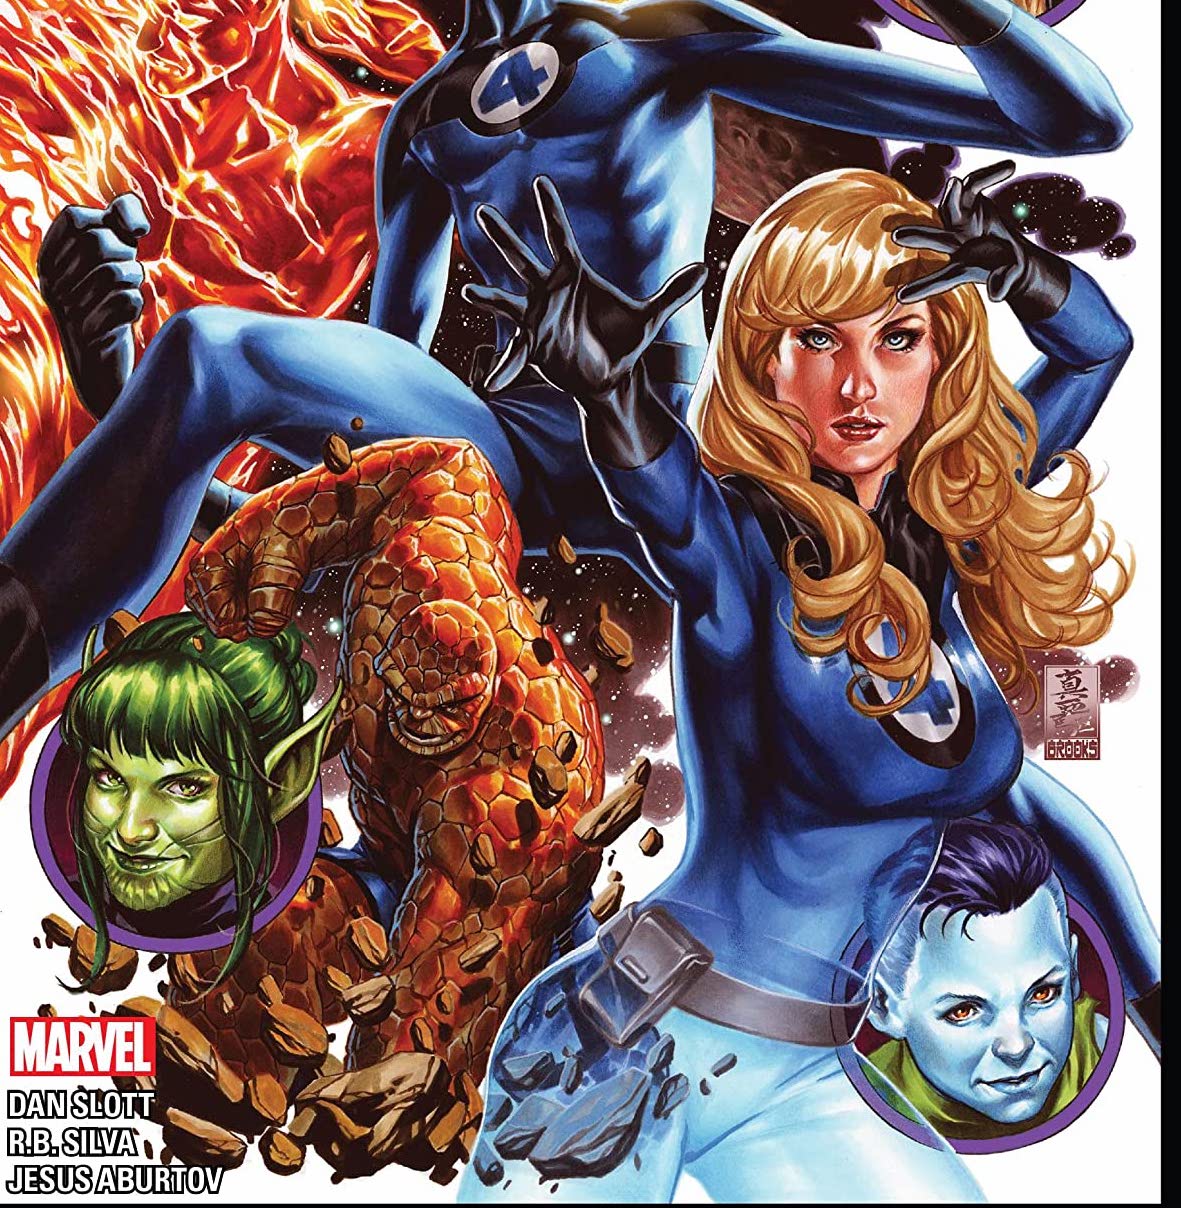 'Fantastic Four Vol. 7 The Forever Gate' is filled with epic sci-fi ideas